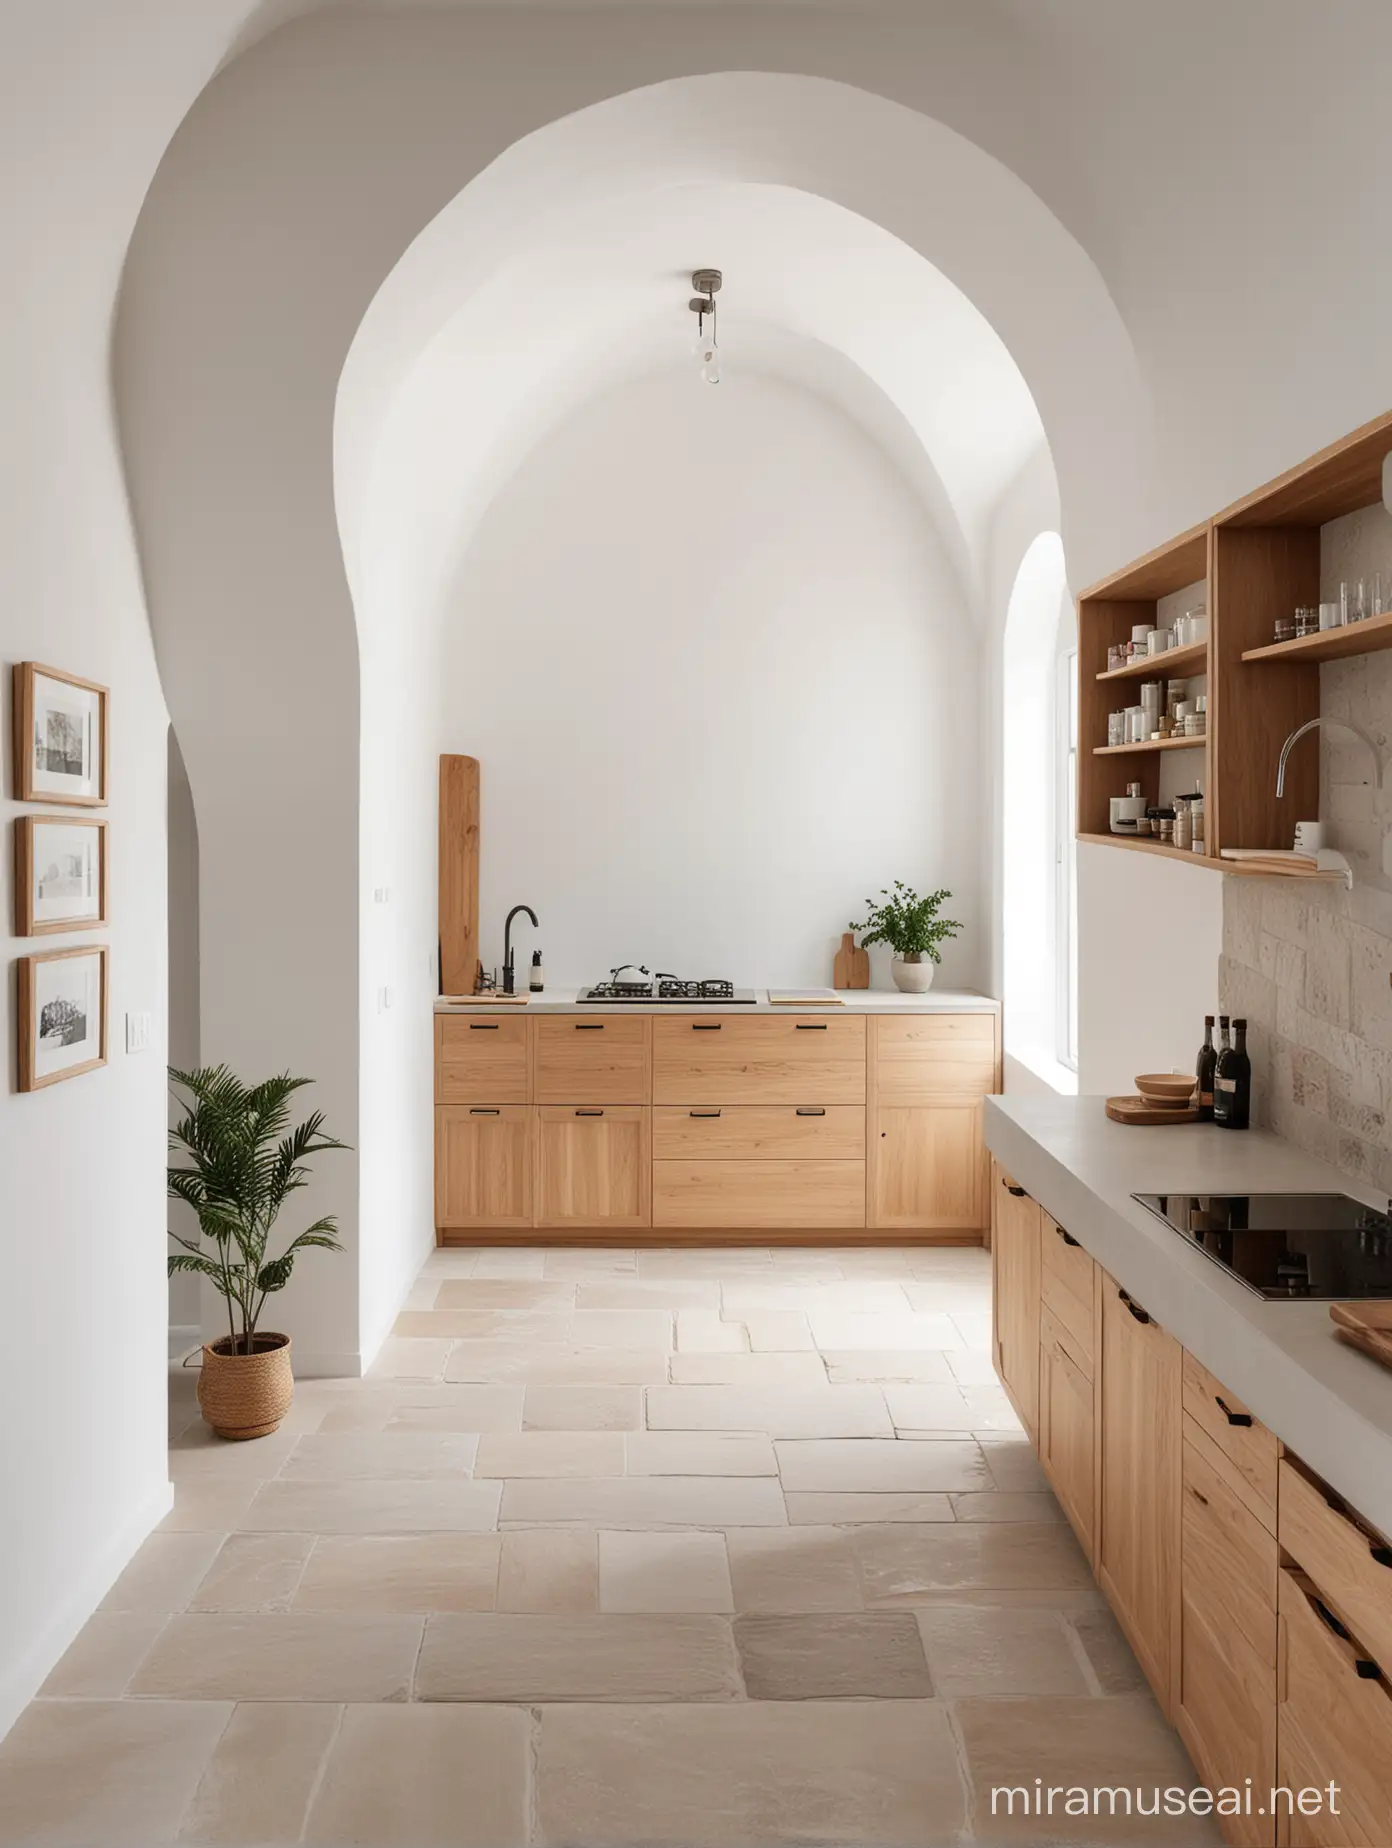 A minimal interior style kitchen, wooden accents, white walls, stone floor, arch in wall, small square canvas on wall in front above counter top, no windows